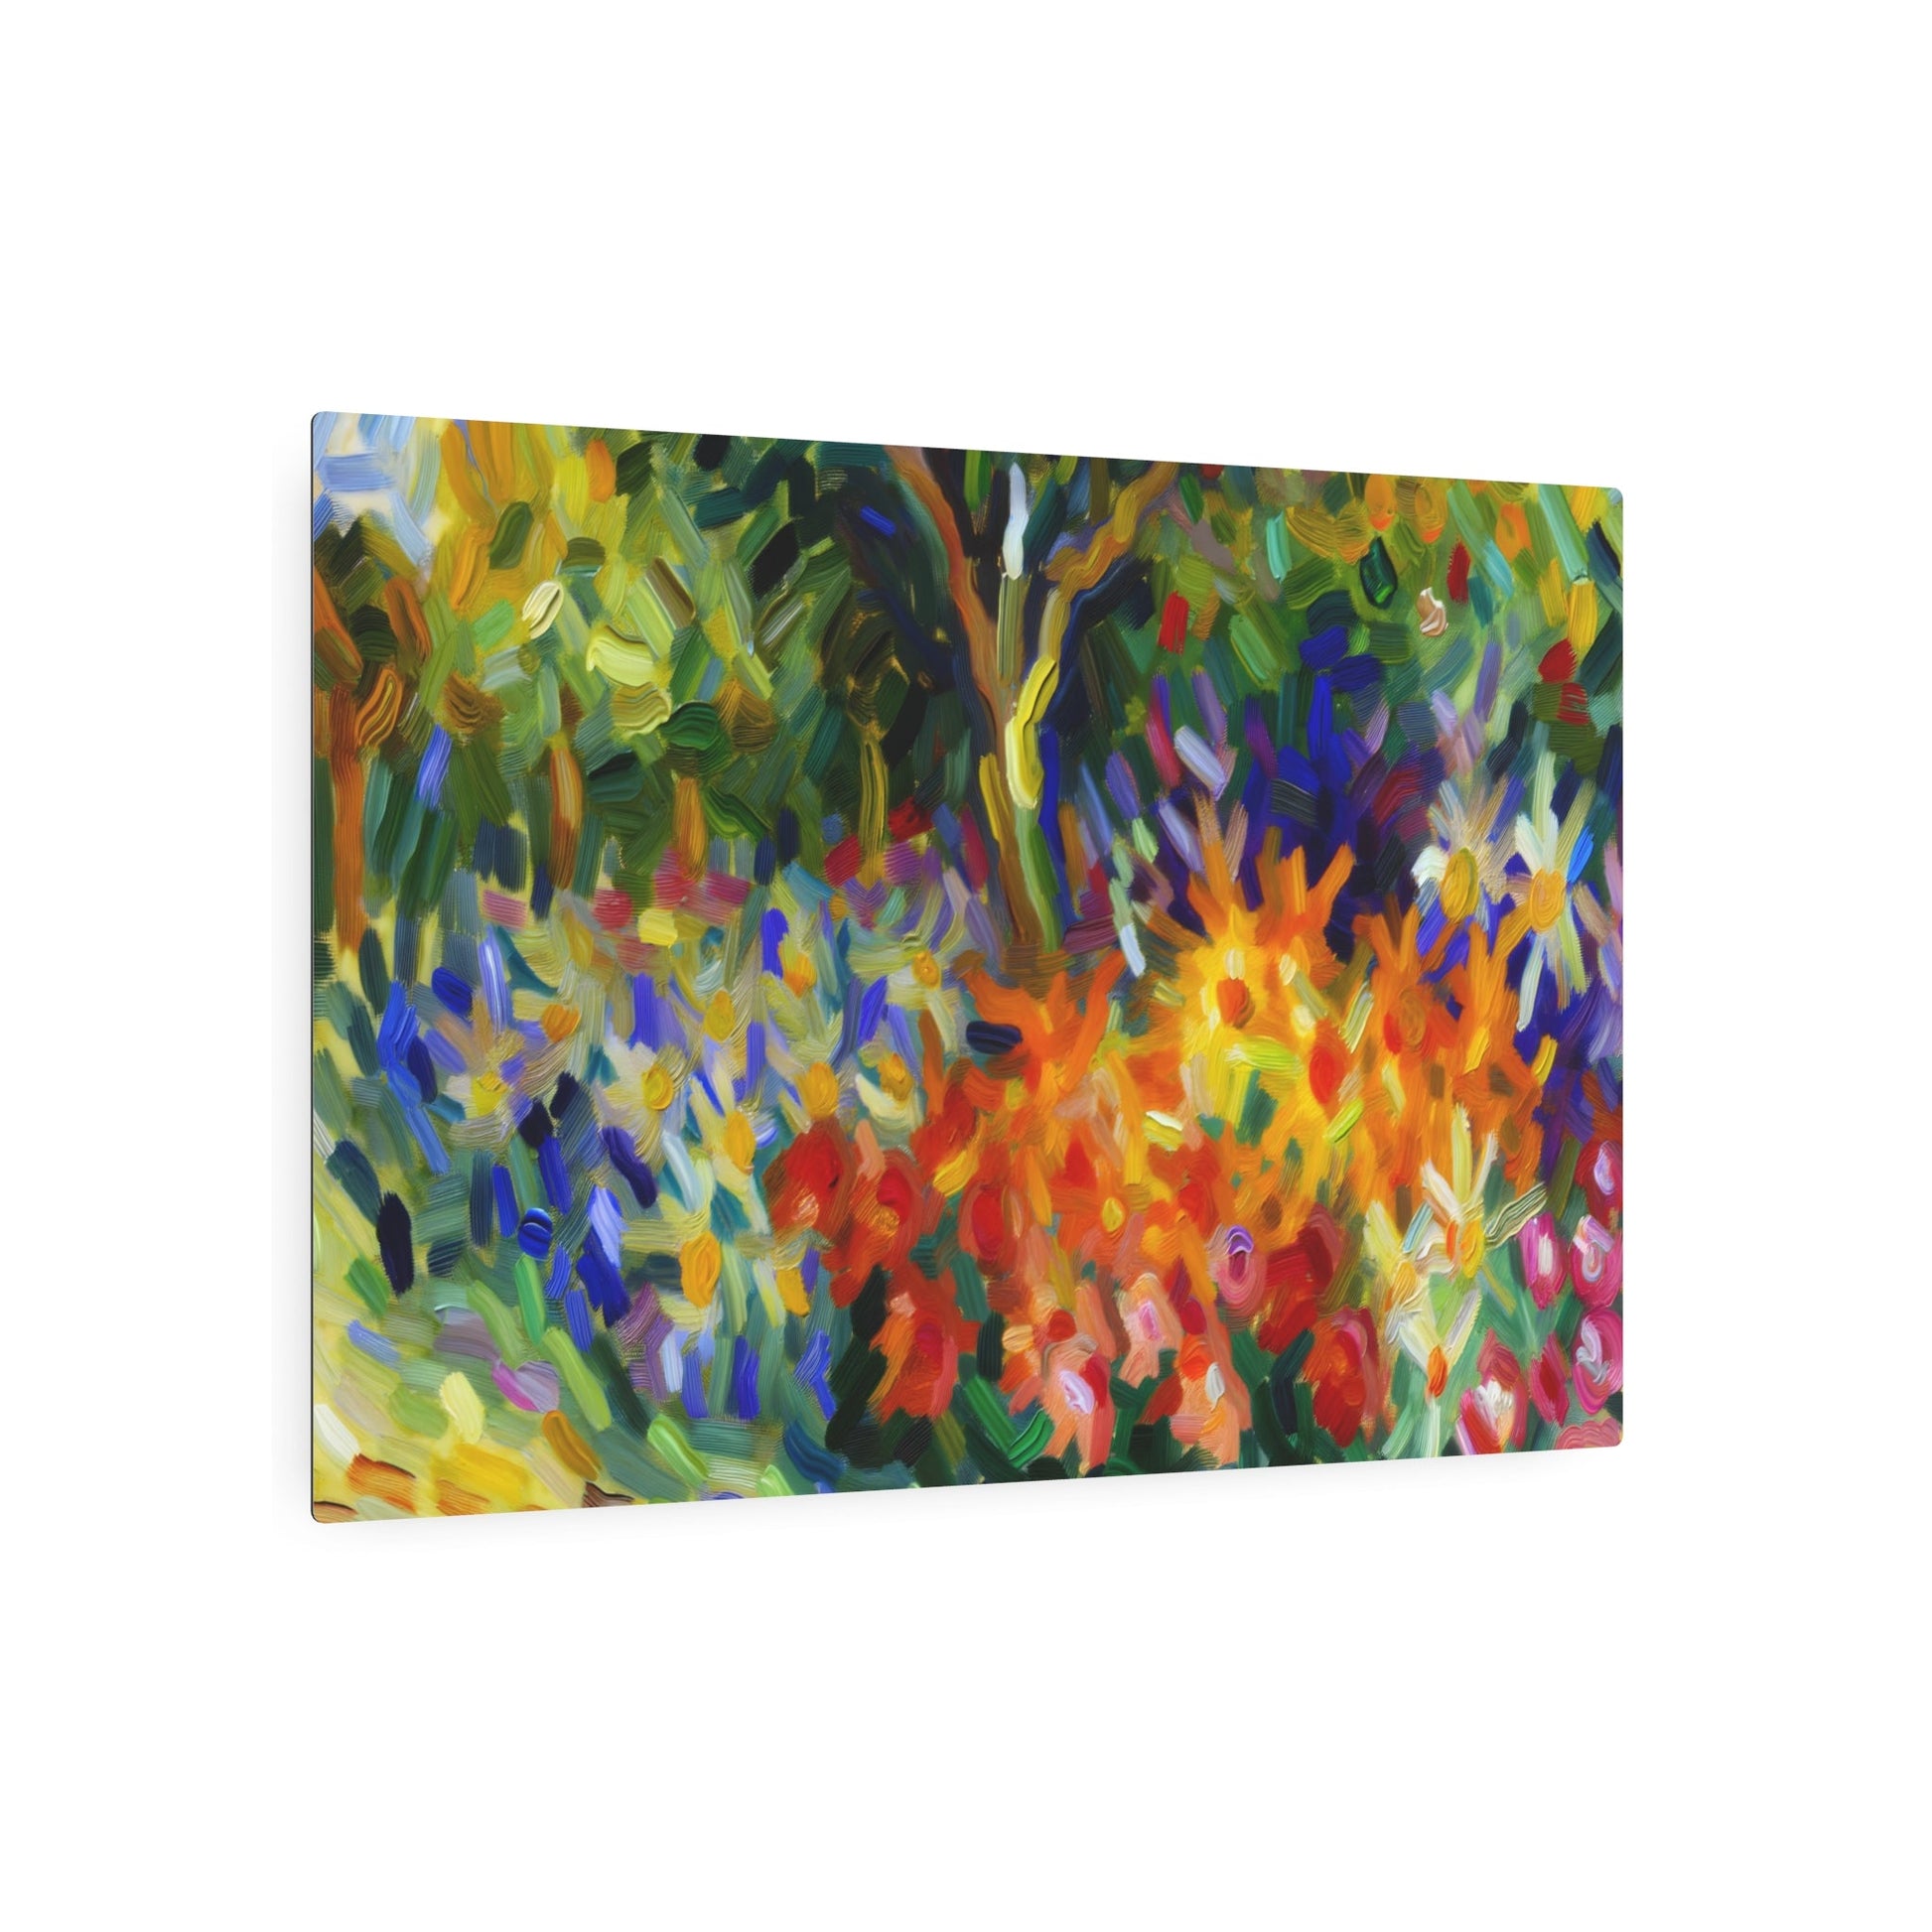 Metal Poster Art | "Expressionistic Western Art Styles: Dramatic, Color-Intensified Garden Flowers - Vivid & Emotional Masterpiece" - Metal Poster Art 36″ x 24″ (Horizontal) 0.12''